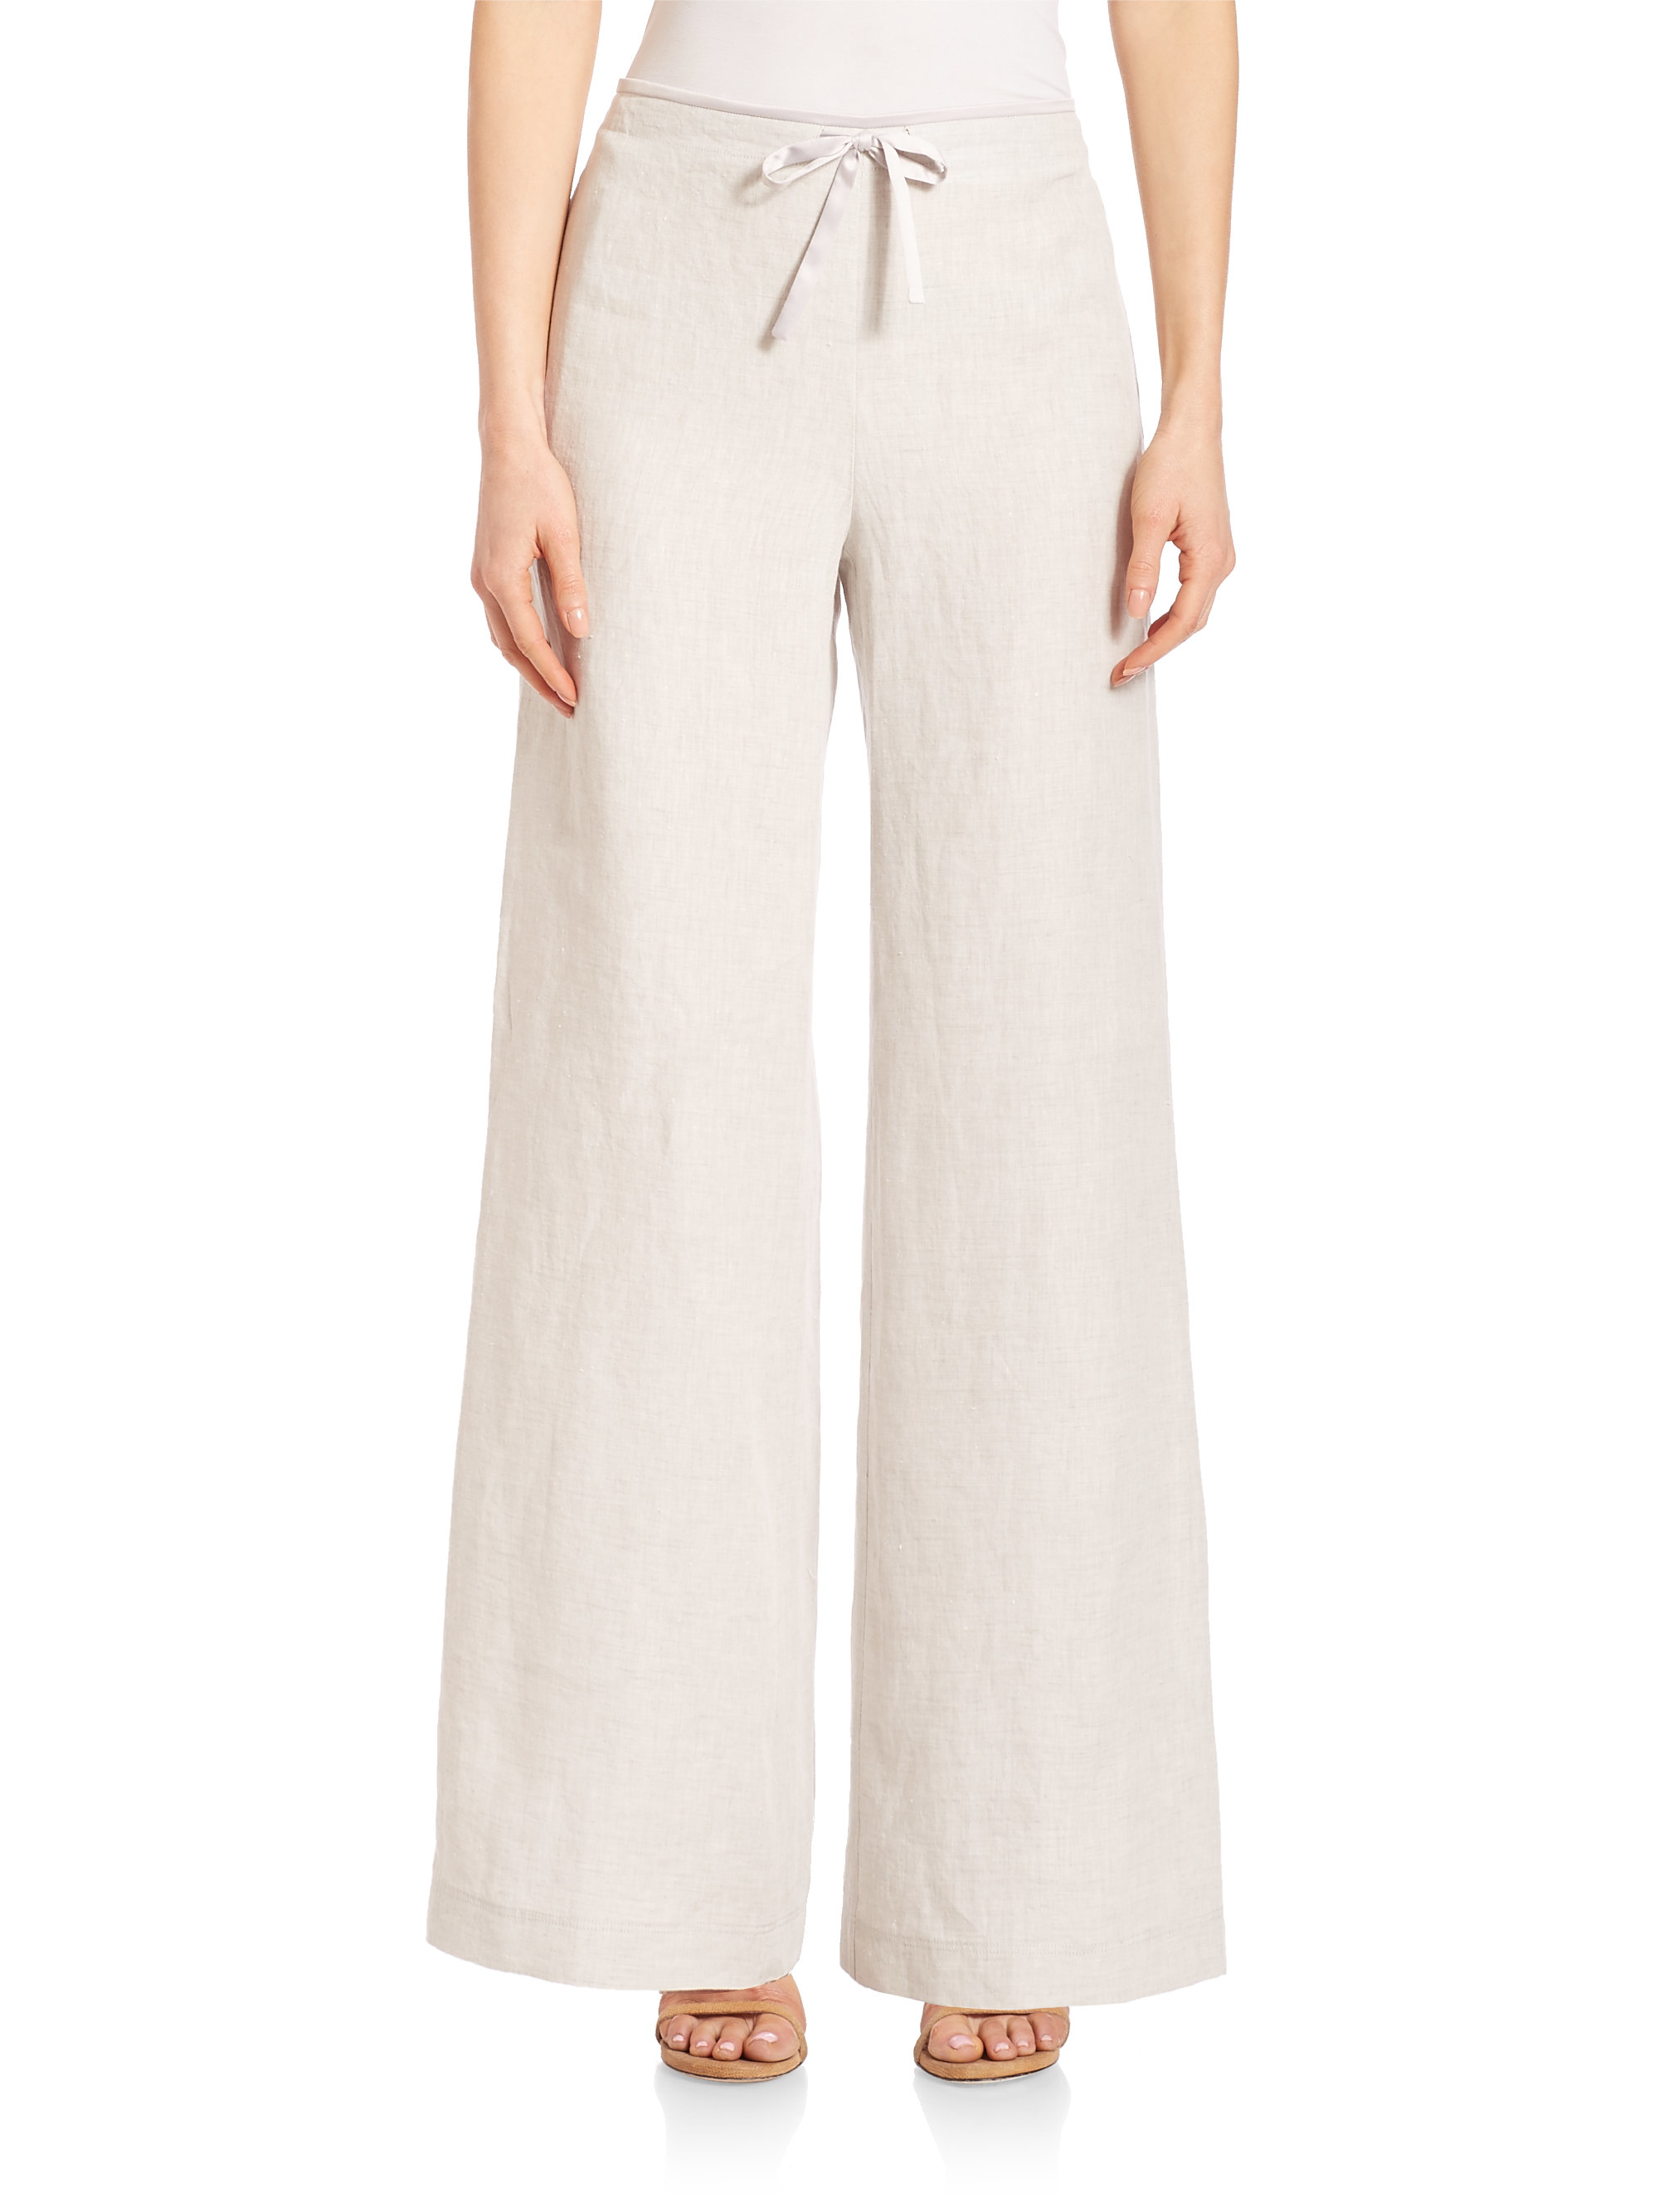 Lyst - Lafayette 148 New York Hierarchy Linen Drawstring Pants in White